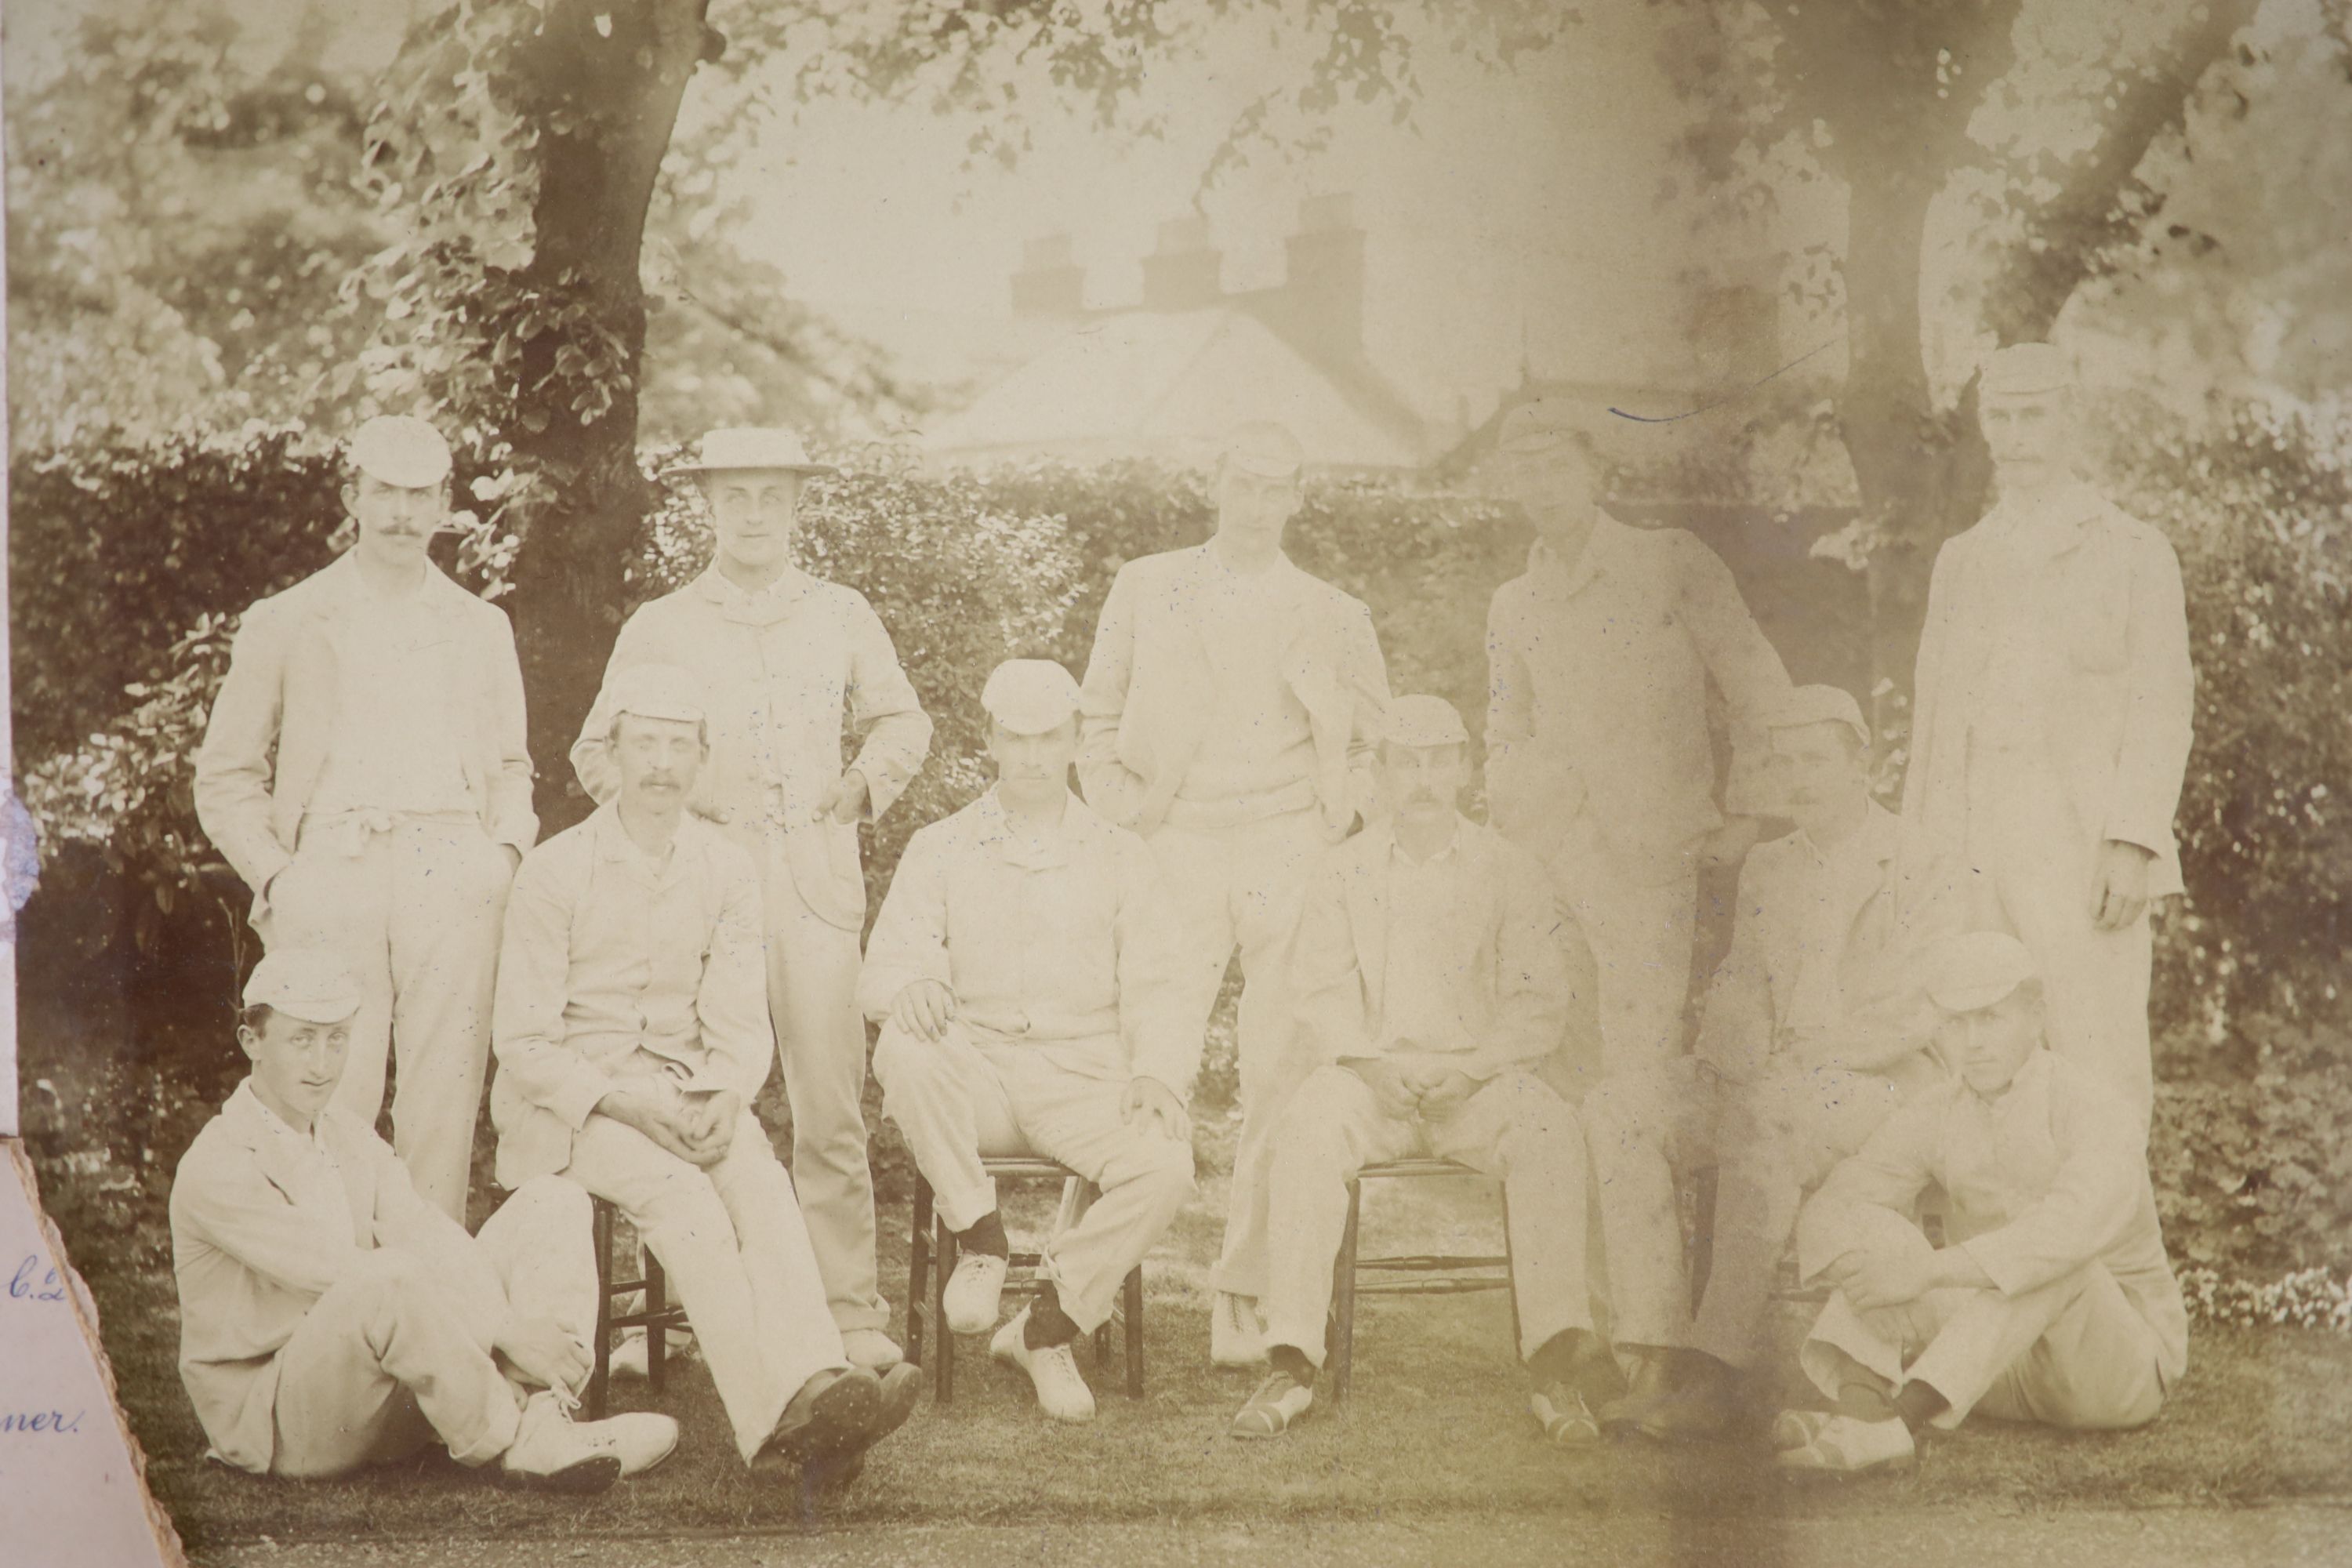 A set of three photographs of the Cambridge University Cricket 11 v Australians 1886, photographed by Hills & Saunders, overall 36 x 11